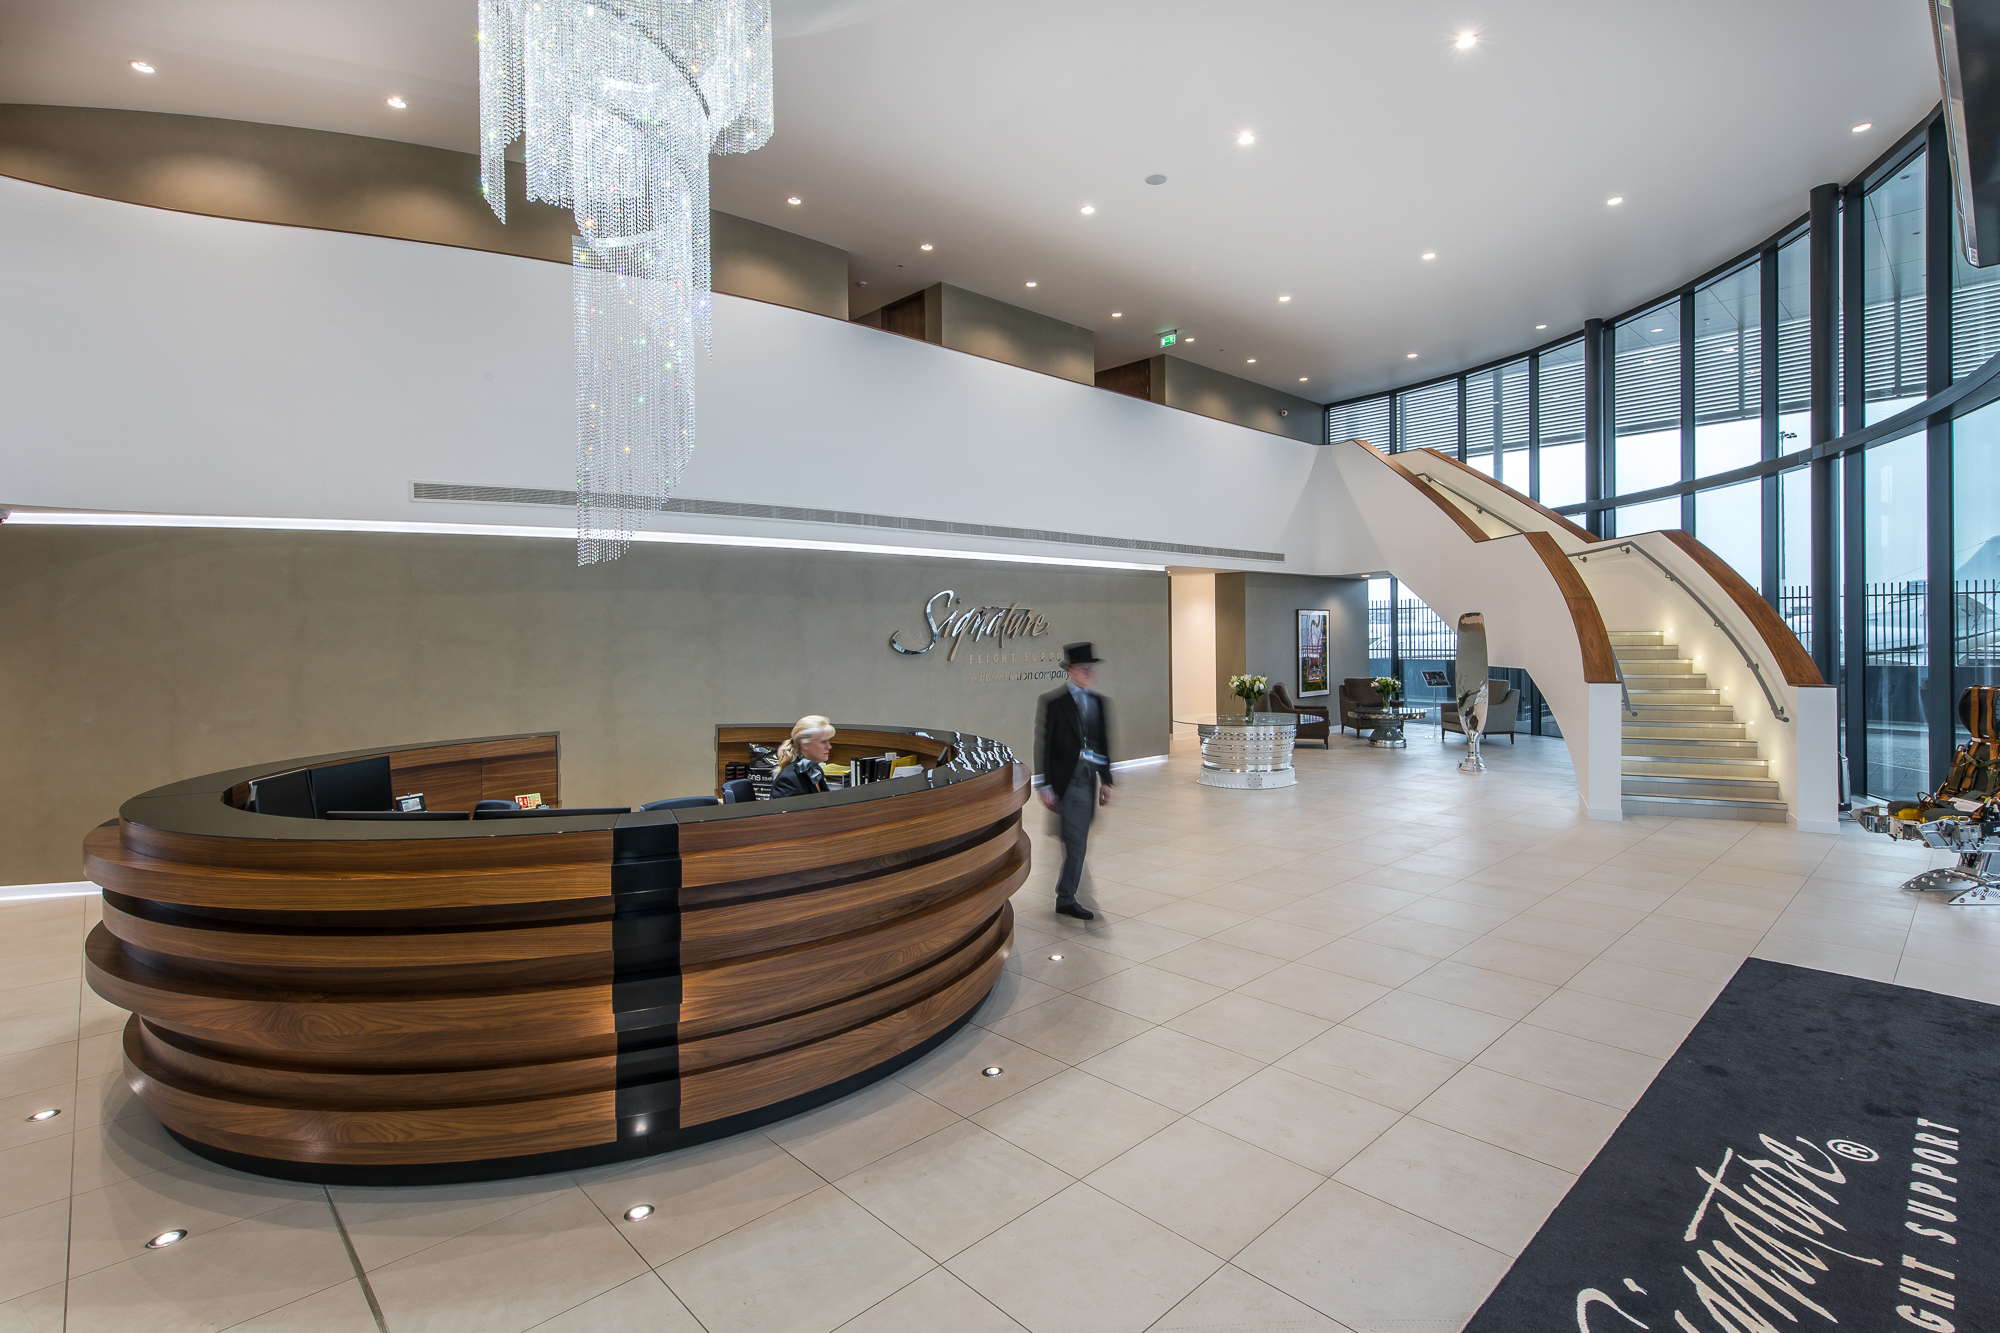 Commercial-interior-photography-luton-airport-16.jpg